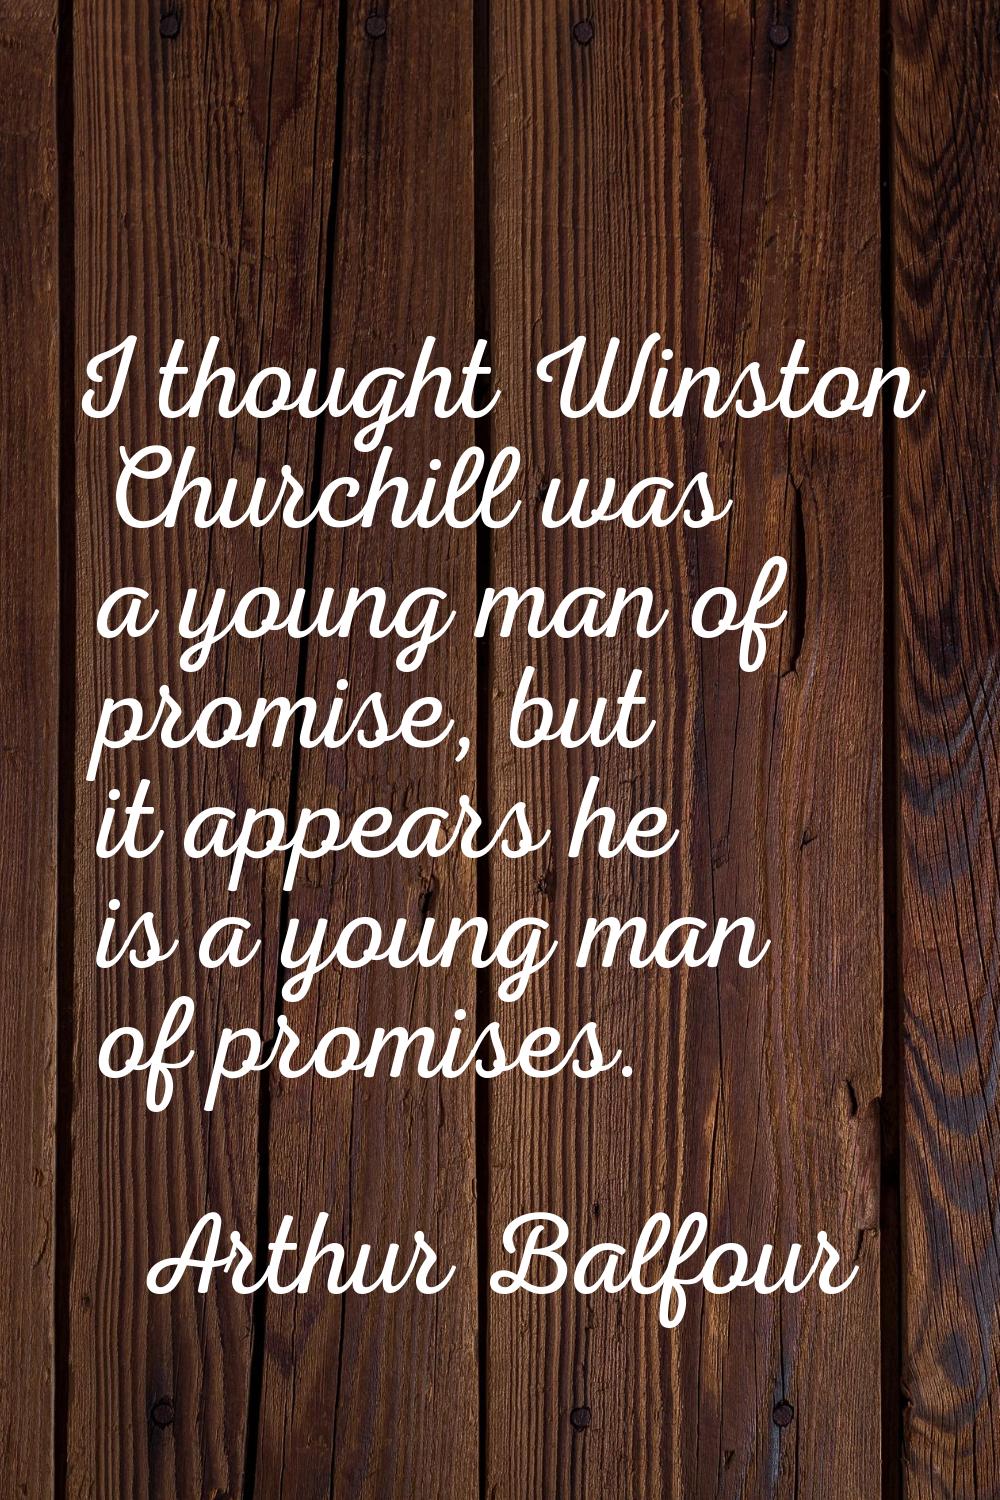 I thought Winston Churchill was a young man of promise, but it appears he is a young man of promise